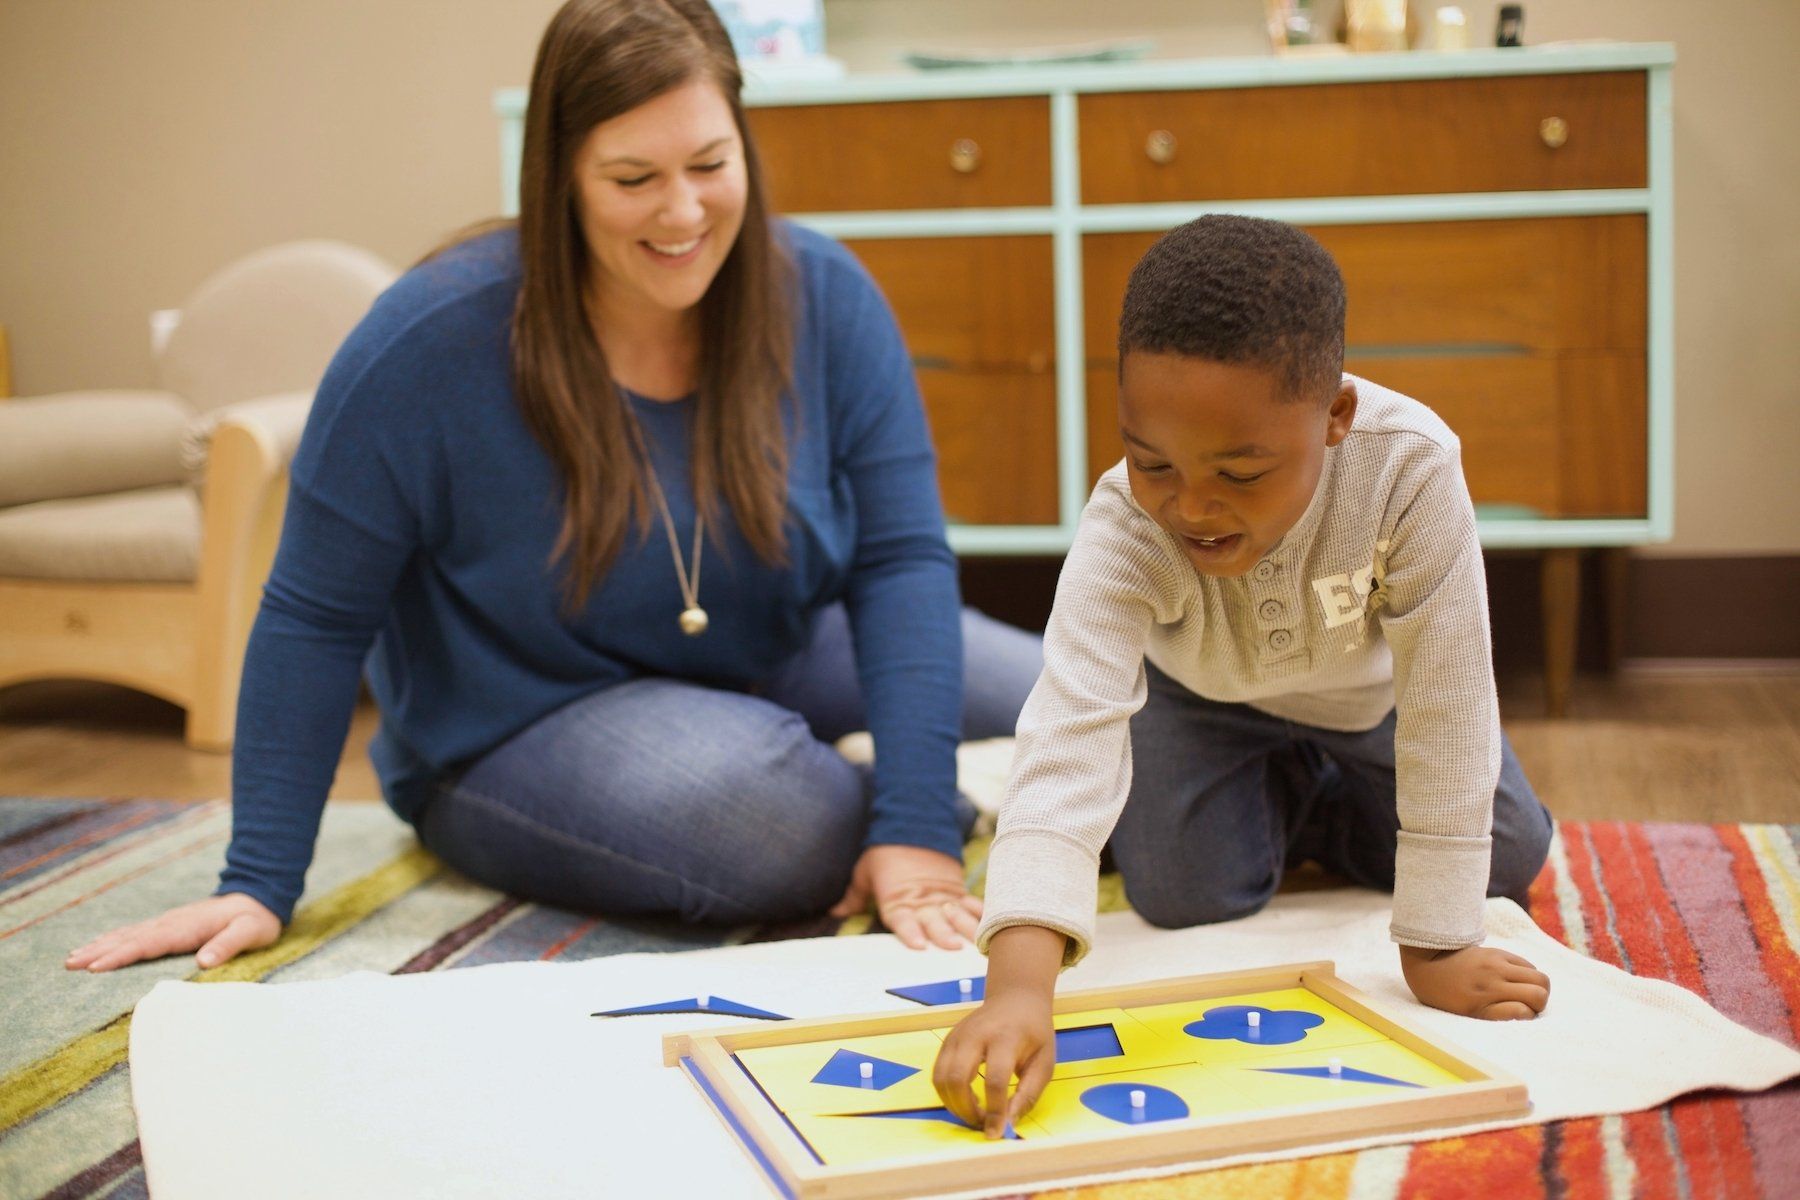 a Guide and a Montessori child are playing with a puzzle on the floor